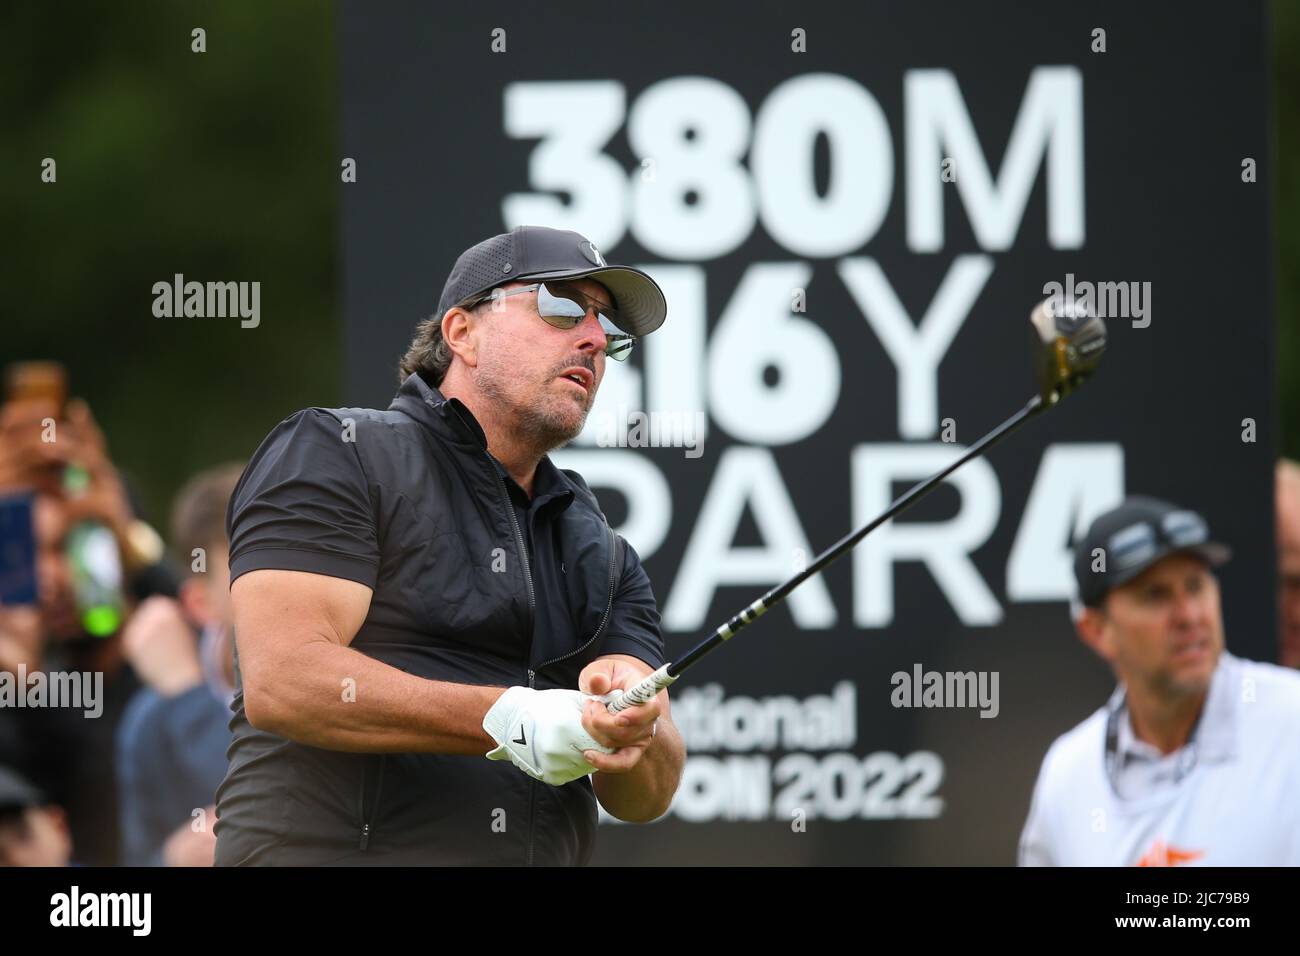 ST ALBANS, ENGLAND - JUNE 09: Phil Mickelson of the United States tees off on the 8th hole during day one of the LIV Golf Invitational at The Centurion Club on June 9, 2022 in St Albans, England. (MB Media) Stock Photo